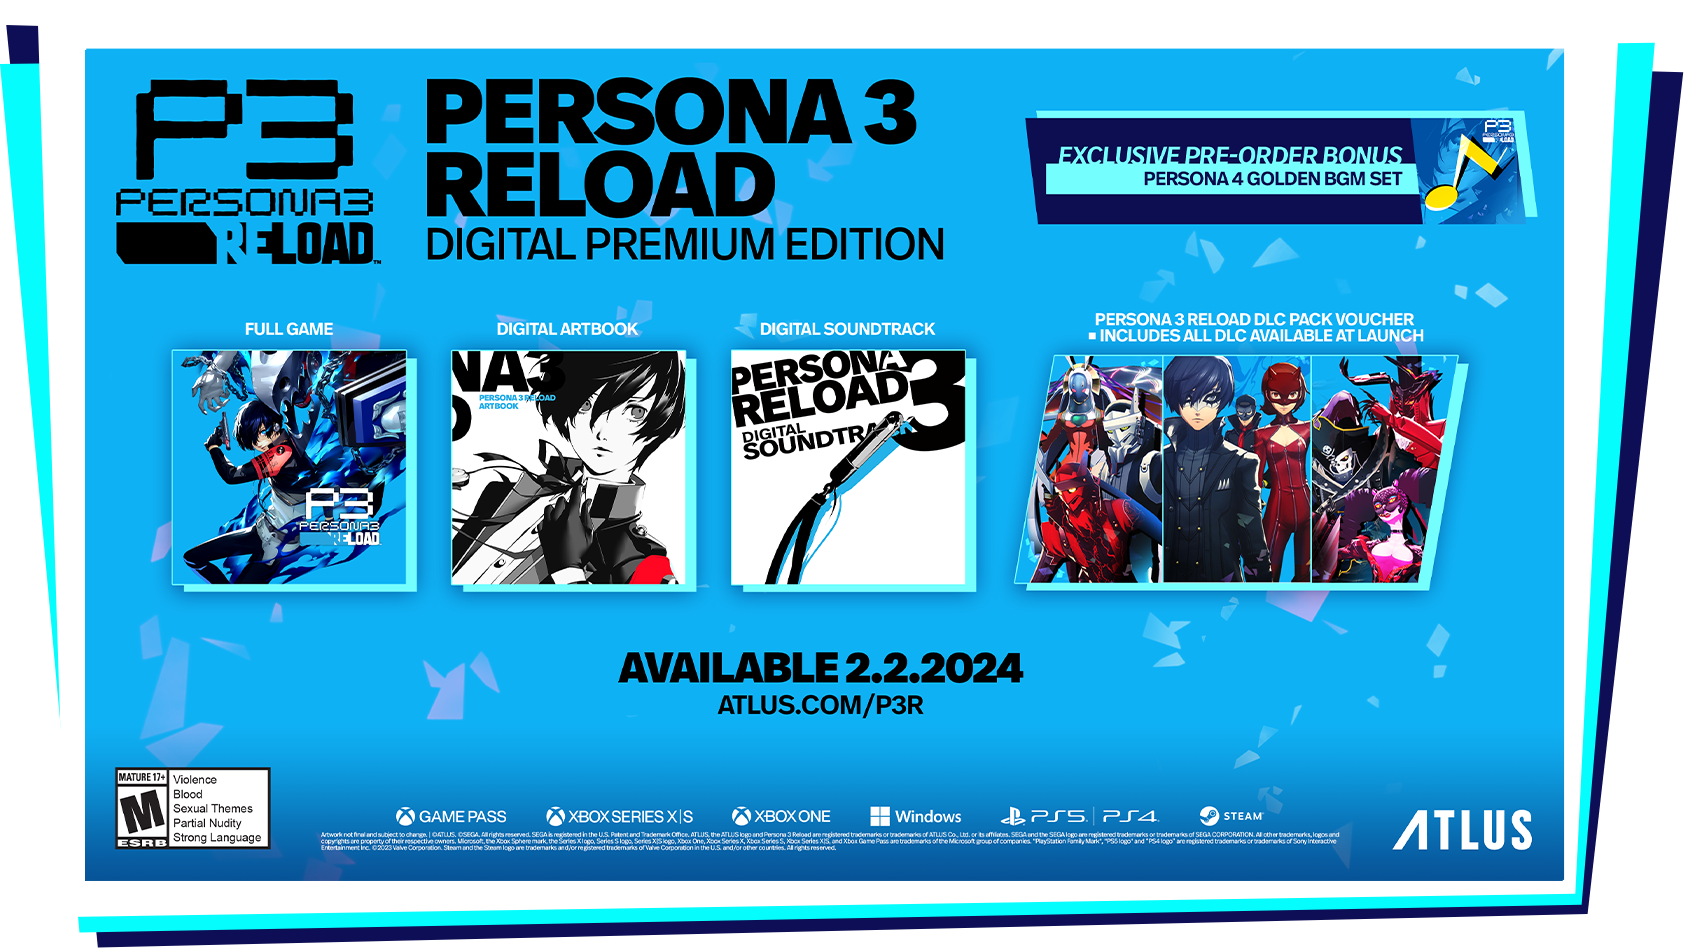 Persona 3 Reload on Steam